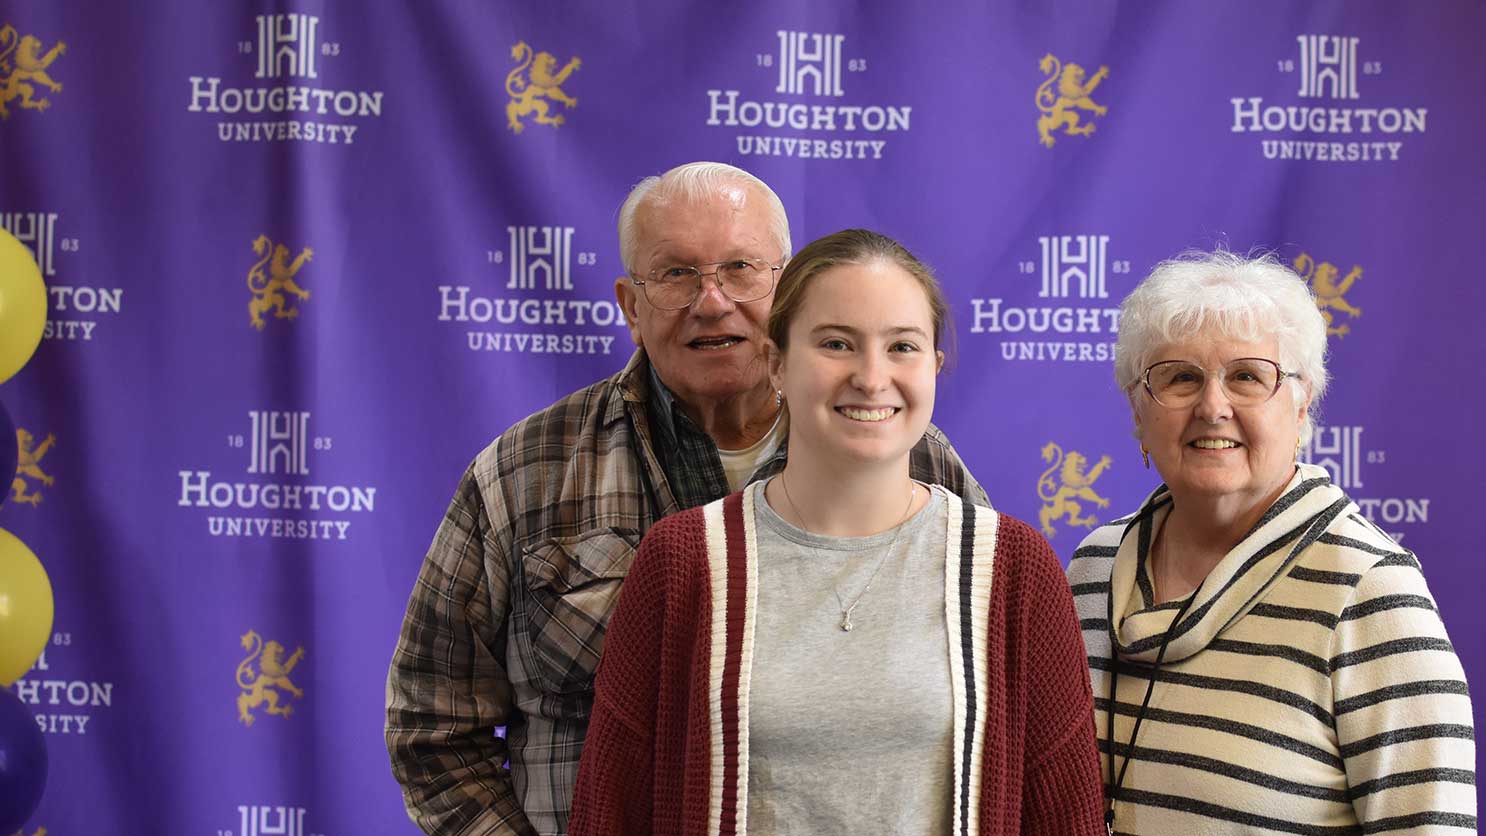 Houghton student standing with her grandparents in front of a Houghton step and repeat banner.